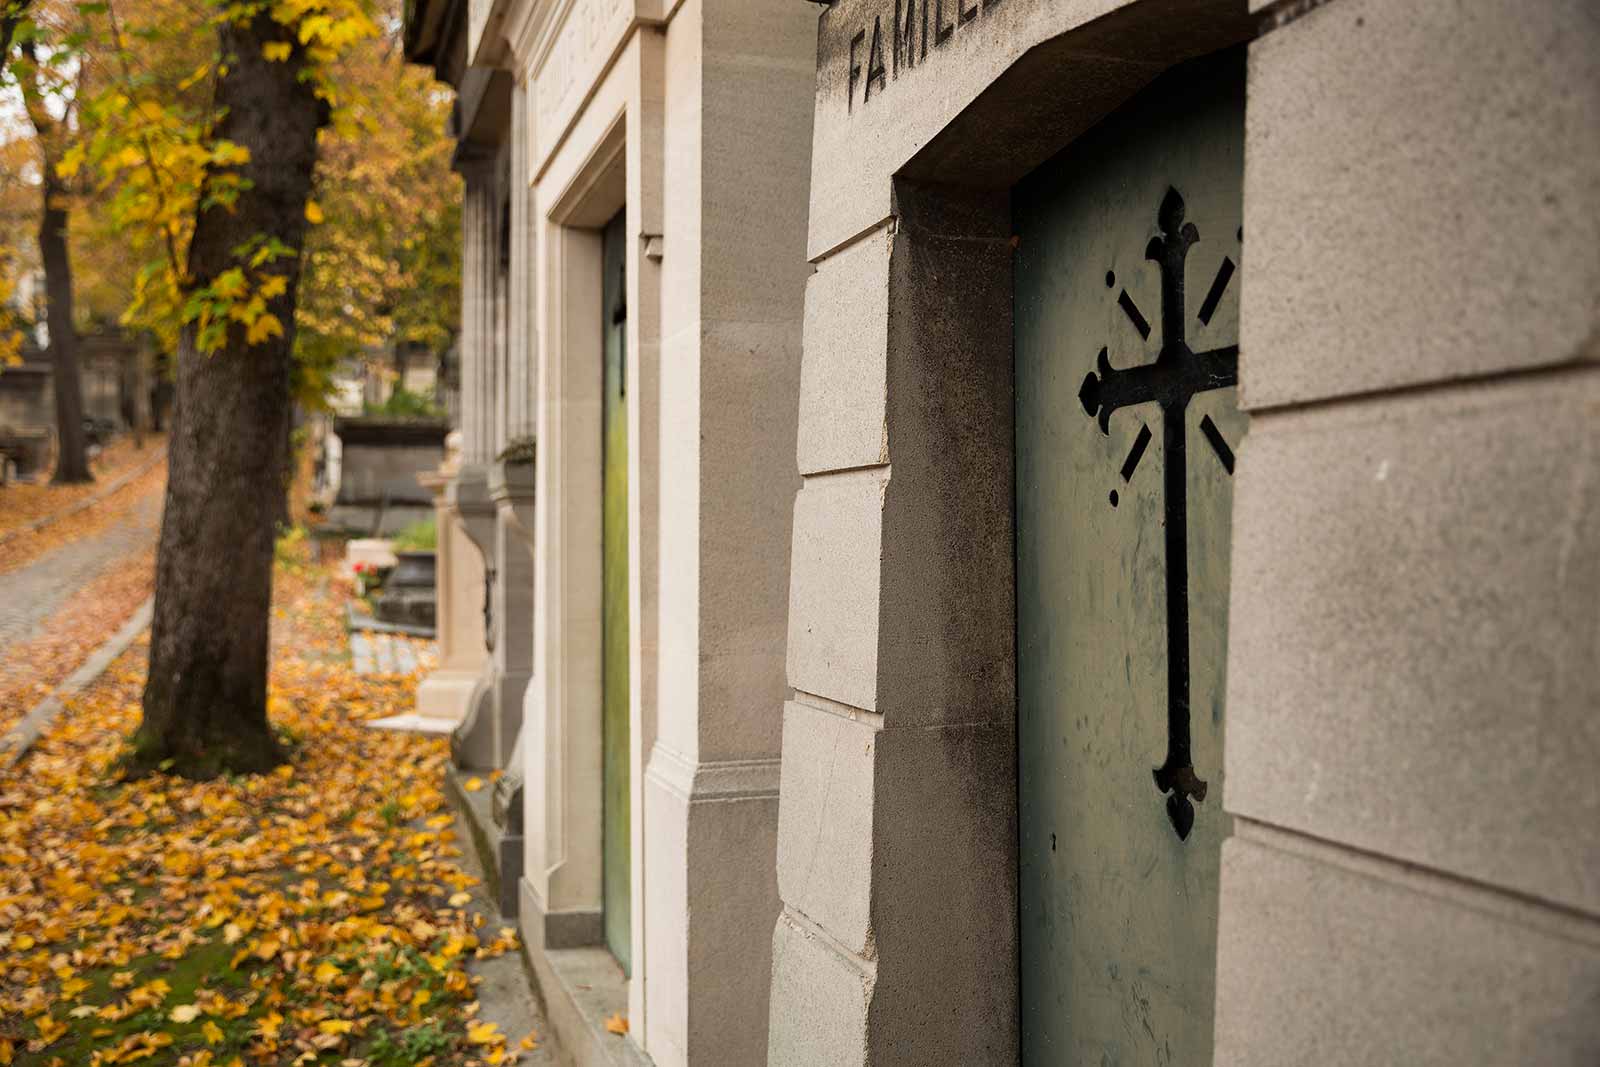 Plan on spending at least a couple hours at Pere Lachaise to really soak up the atmosphere and to get a sense of the place.